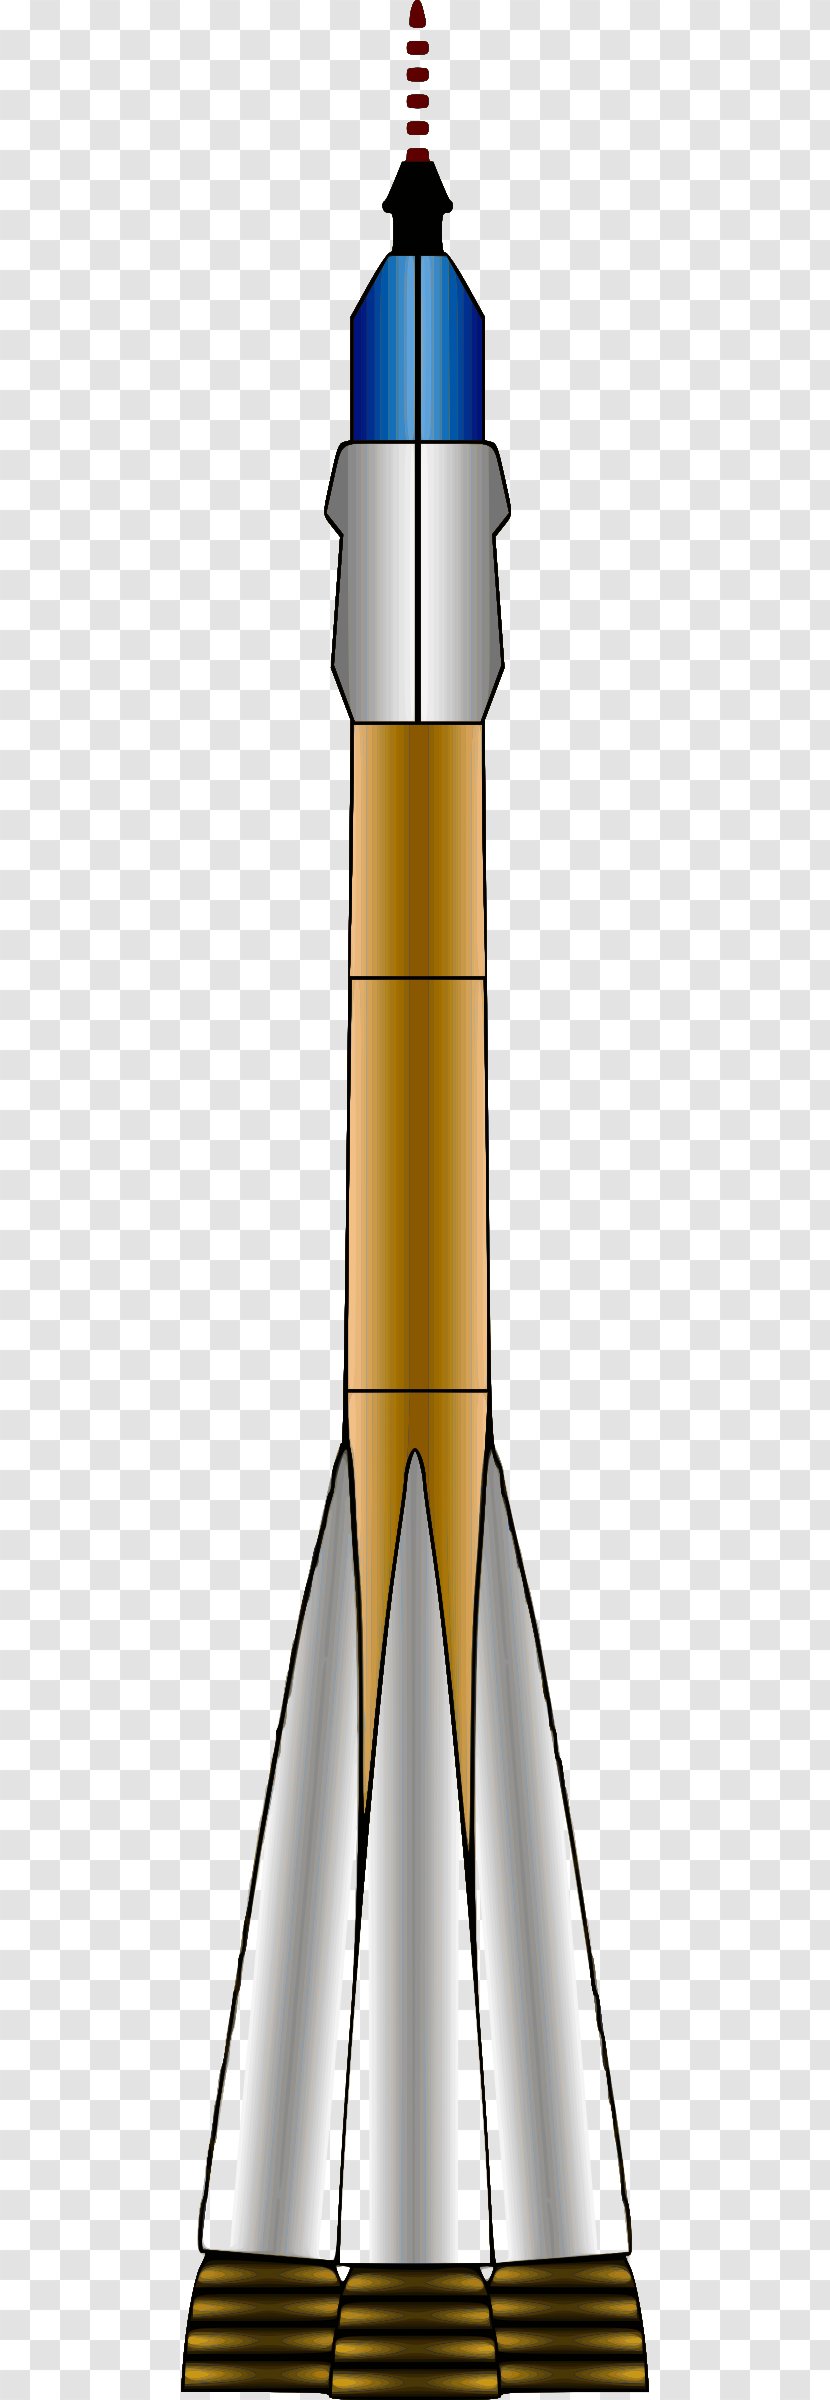 Drawing The Head And Hands Rocket Clip Art - Launcher Transparent PNG